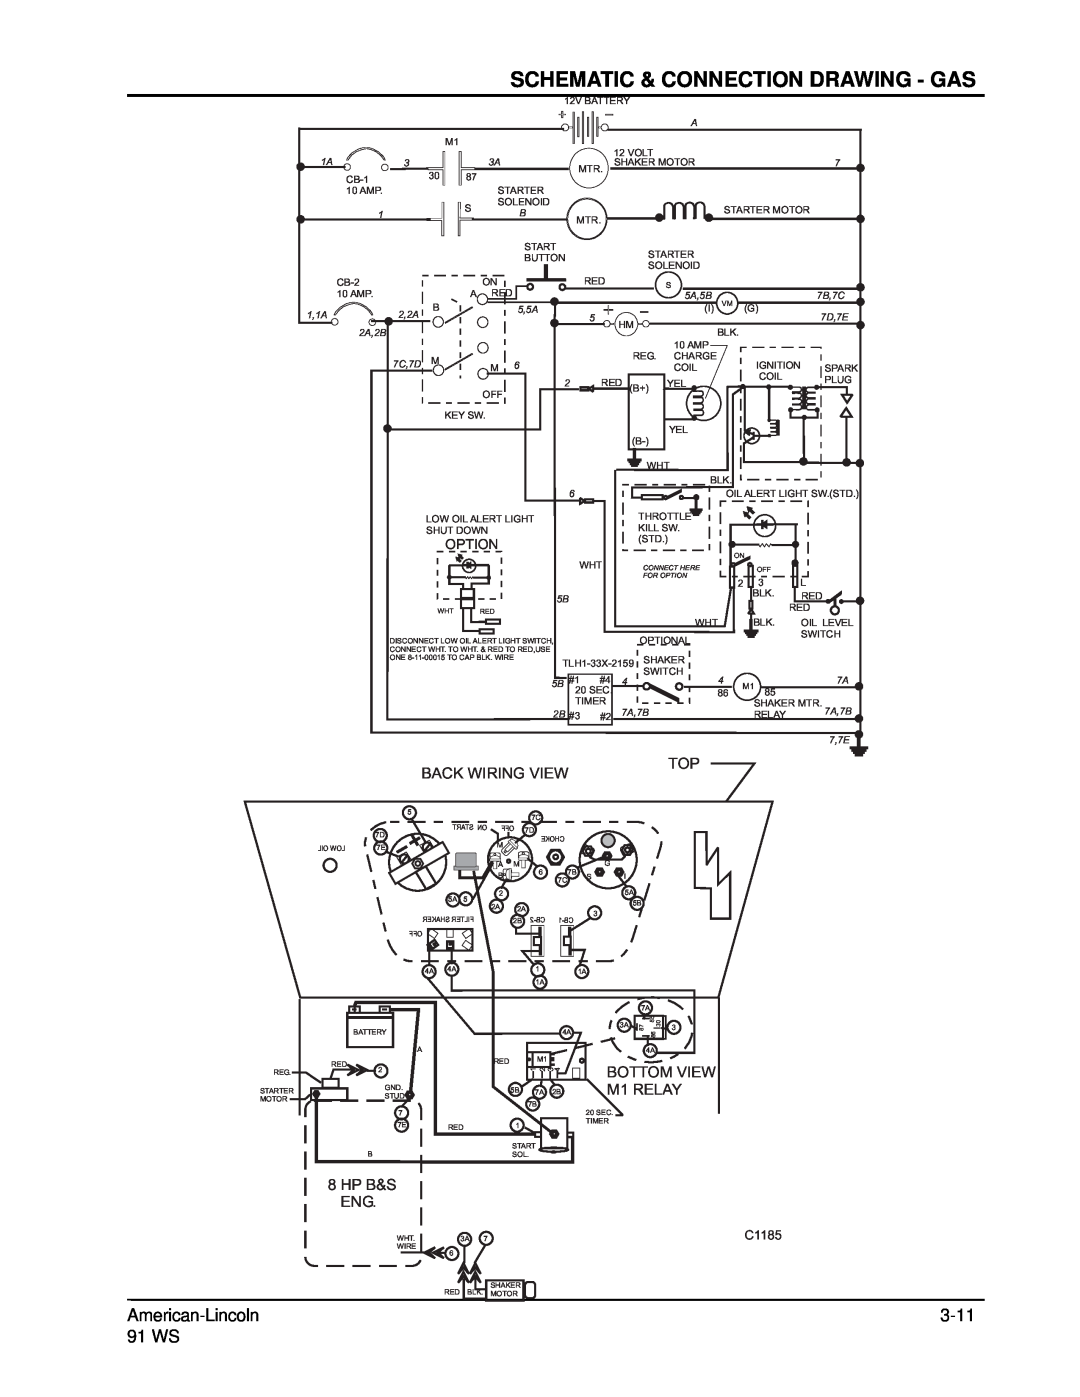 Nilfisk-ALTO 91WS manual Schematic & Connection Drawing - Gas, Back Wiring View, BOTTOM VIEW M1 RELAY, Hp B&S Eng 